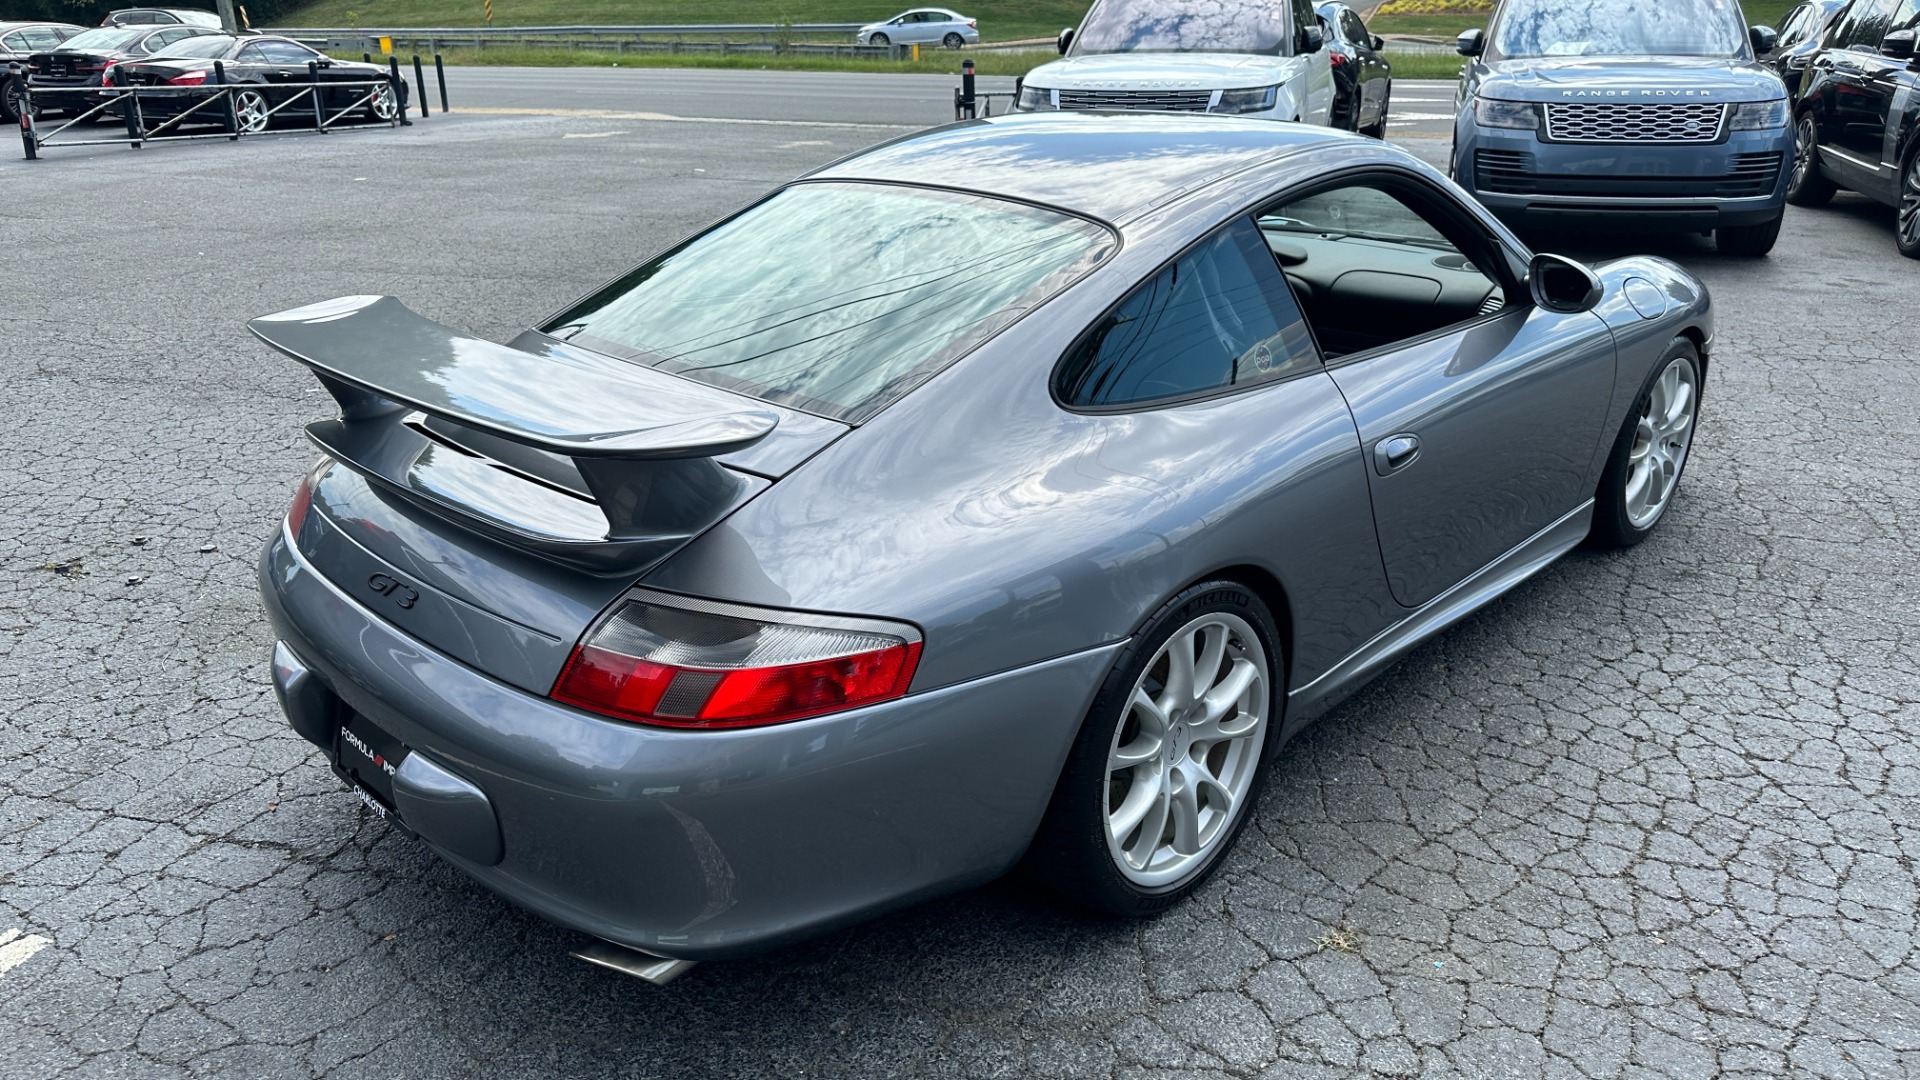 Used 2004 Porsche 911 GT3 / SPORTS SEATS / SERVICE BINDER / CLEAN DME for sale $121,900 at Formula Imports in Charlotte NC 28227 3